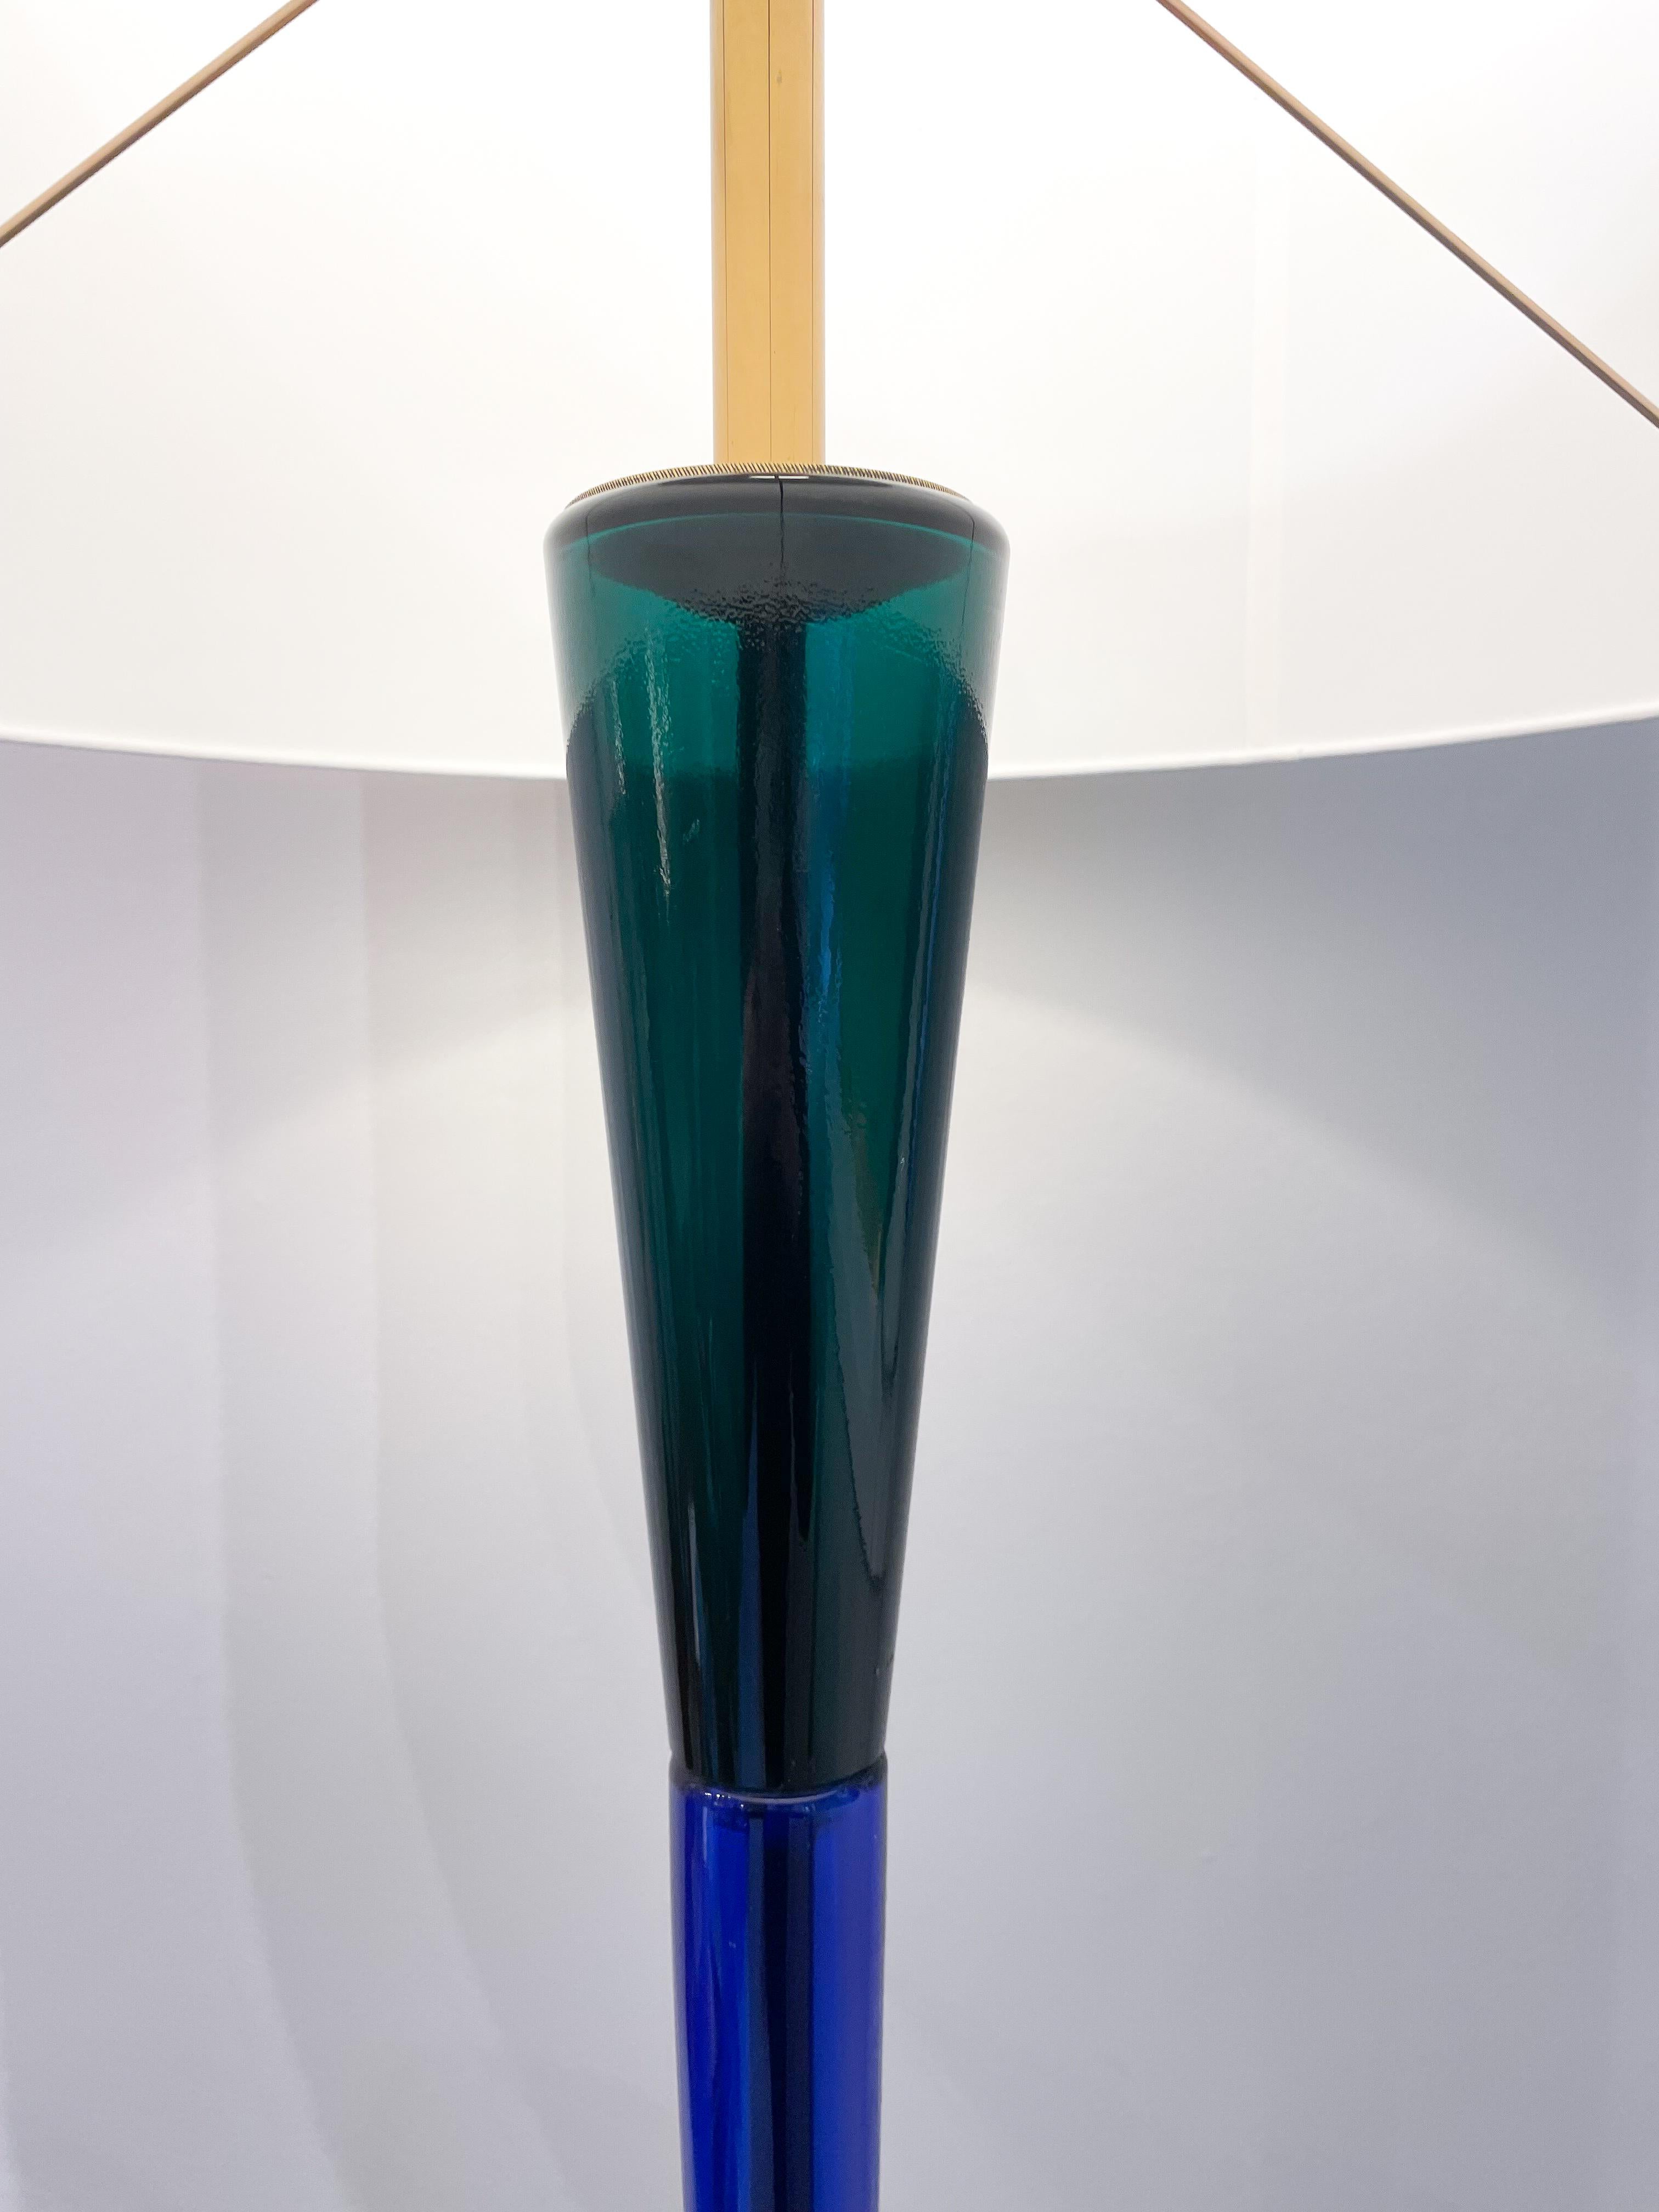 Mid-Century Blue and Green Murano Glass Floor lamp by Fulvio Bianconi, 1950s For Sale 2